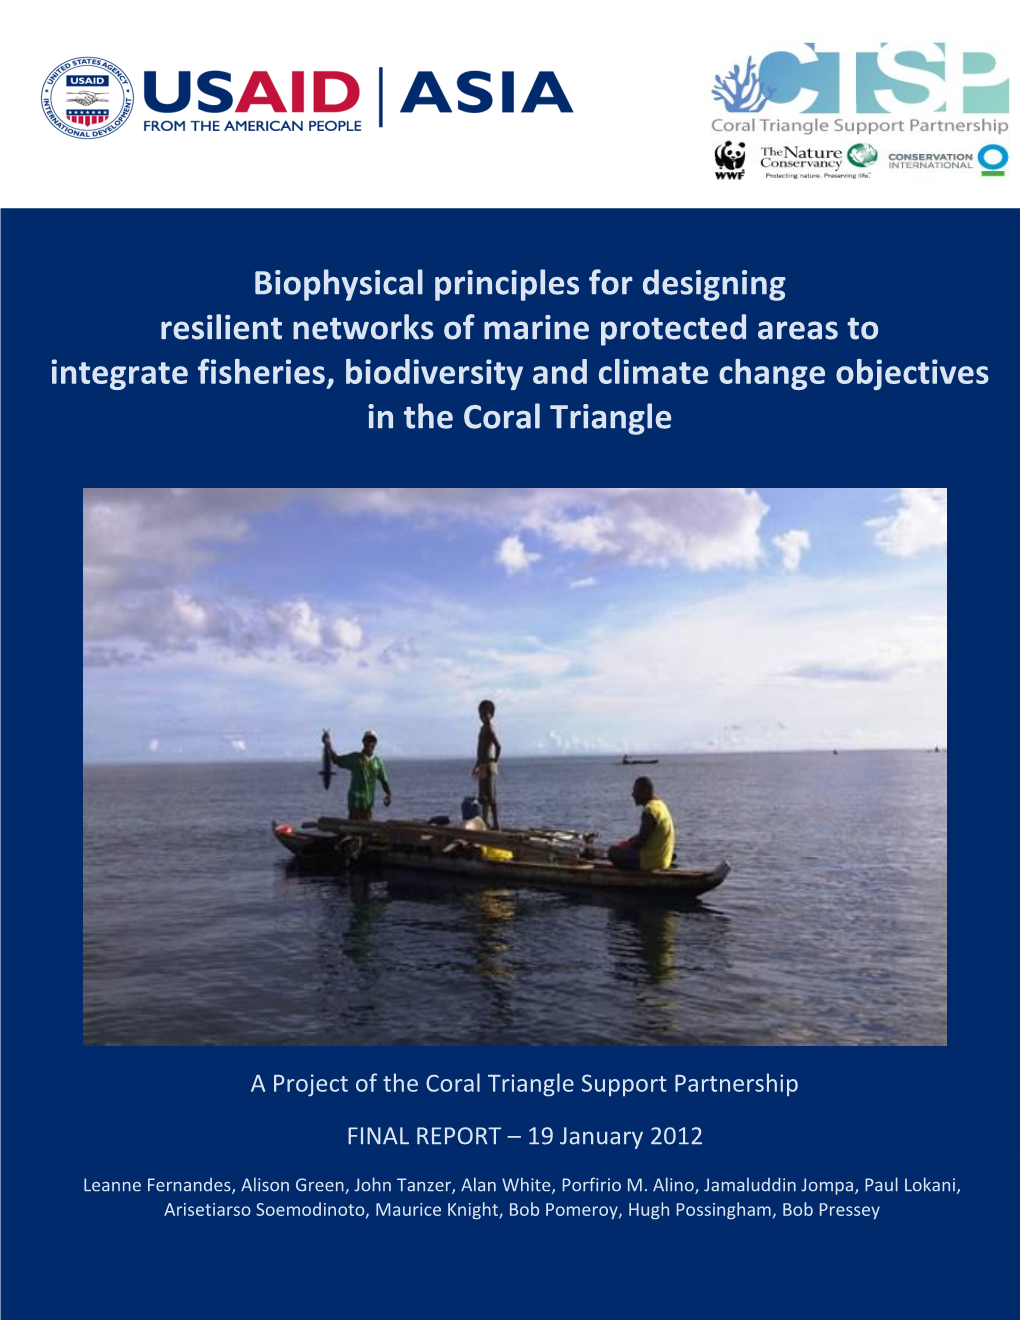 Biophysical Principles for Designing Resilient Networks of Marine Protected Areas to Integrate Fisheries, Biodiversity and Clim